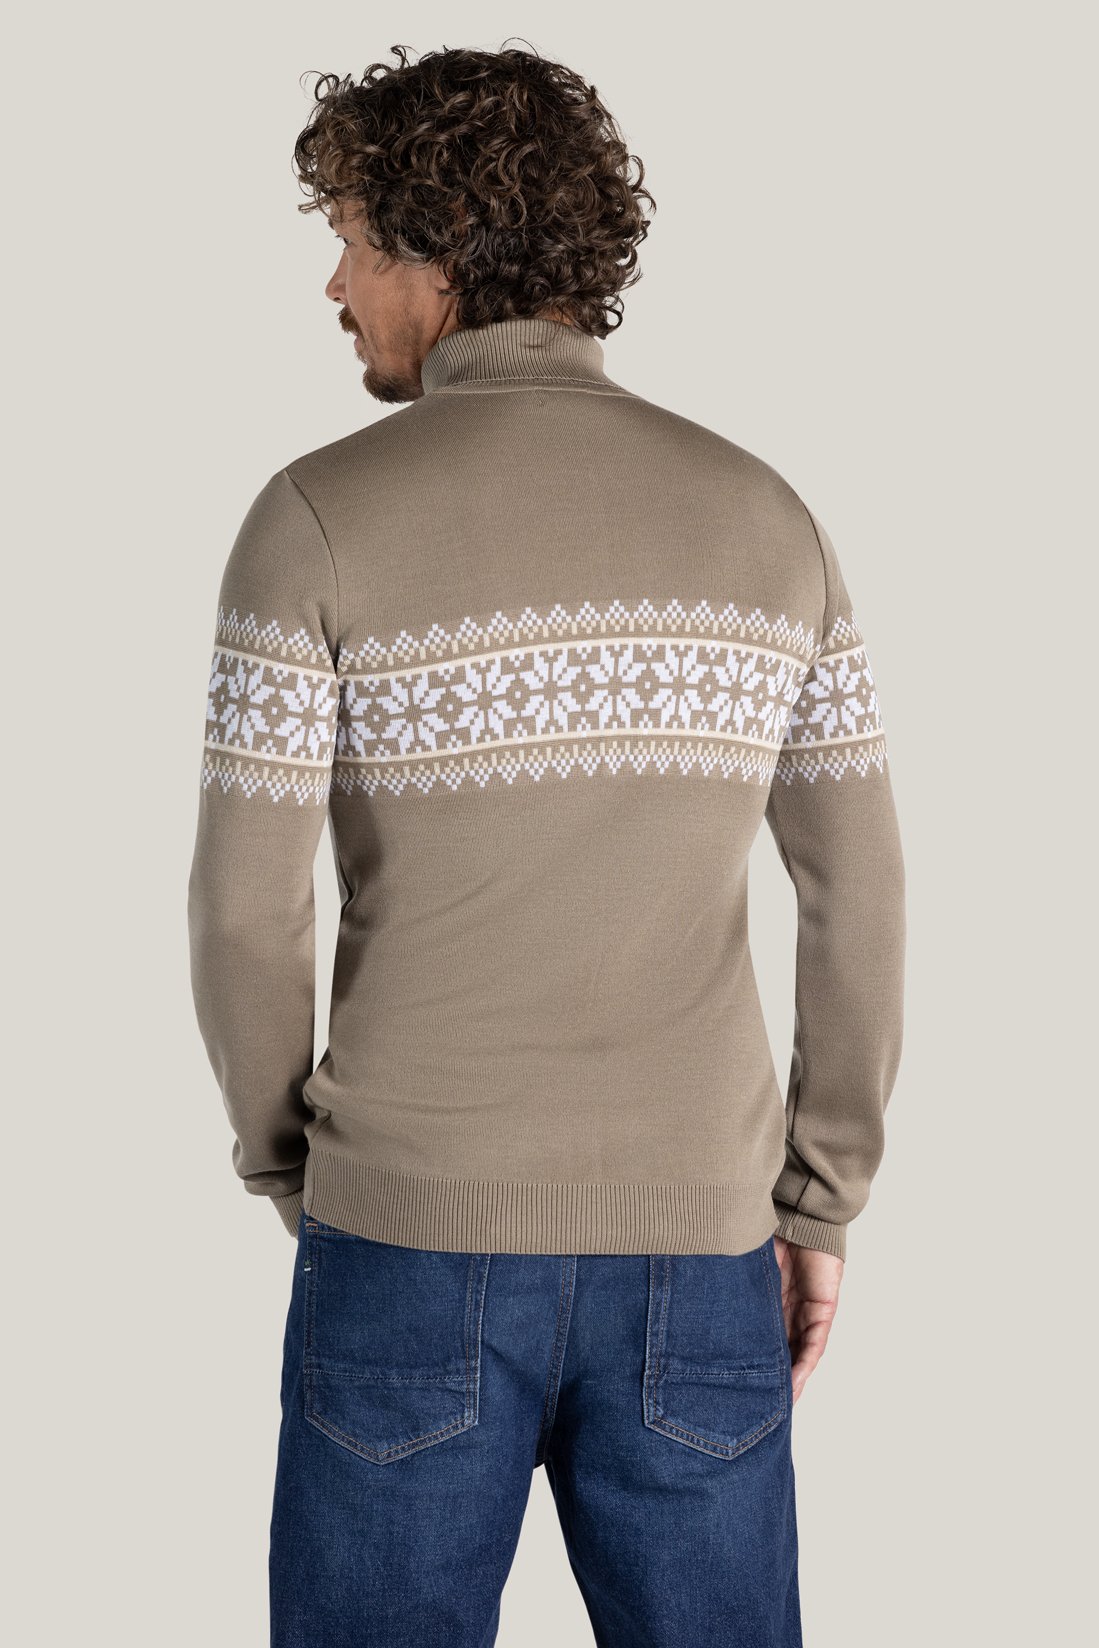 Nils turtleneck sweater in beige made of Merino and Tencel from Tidløs